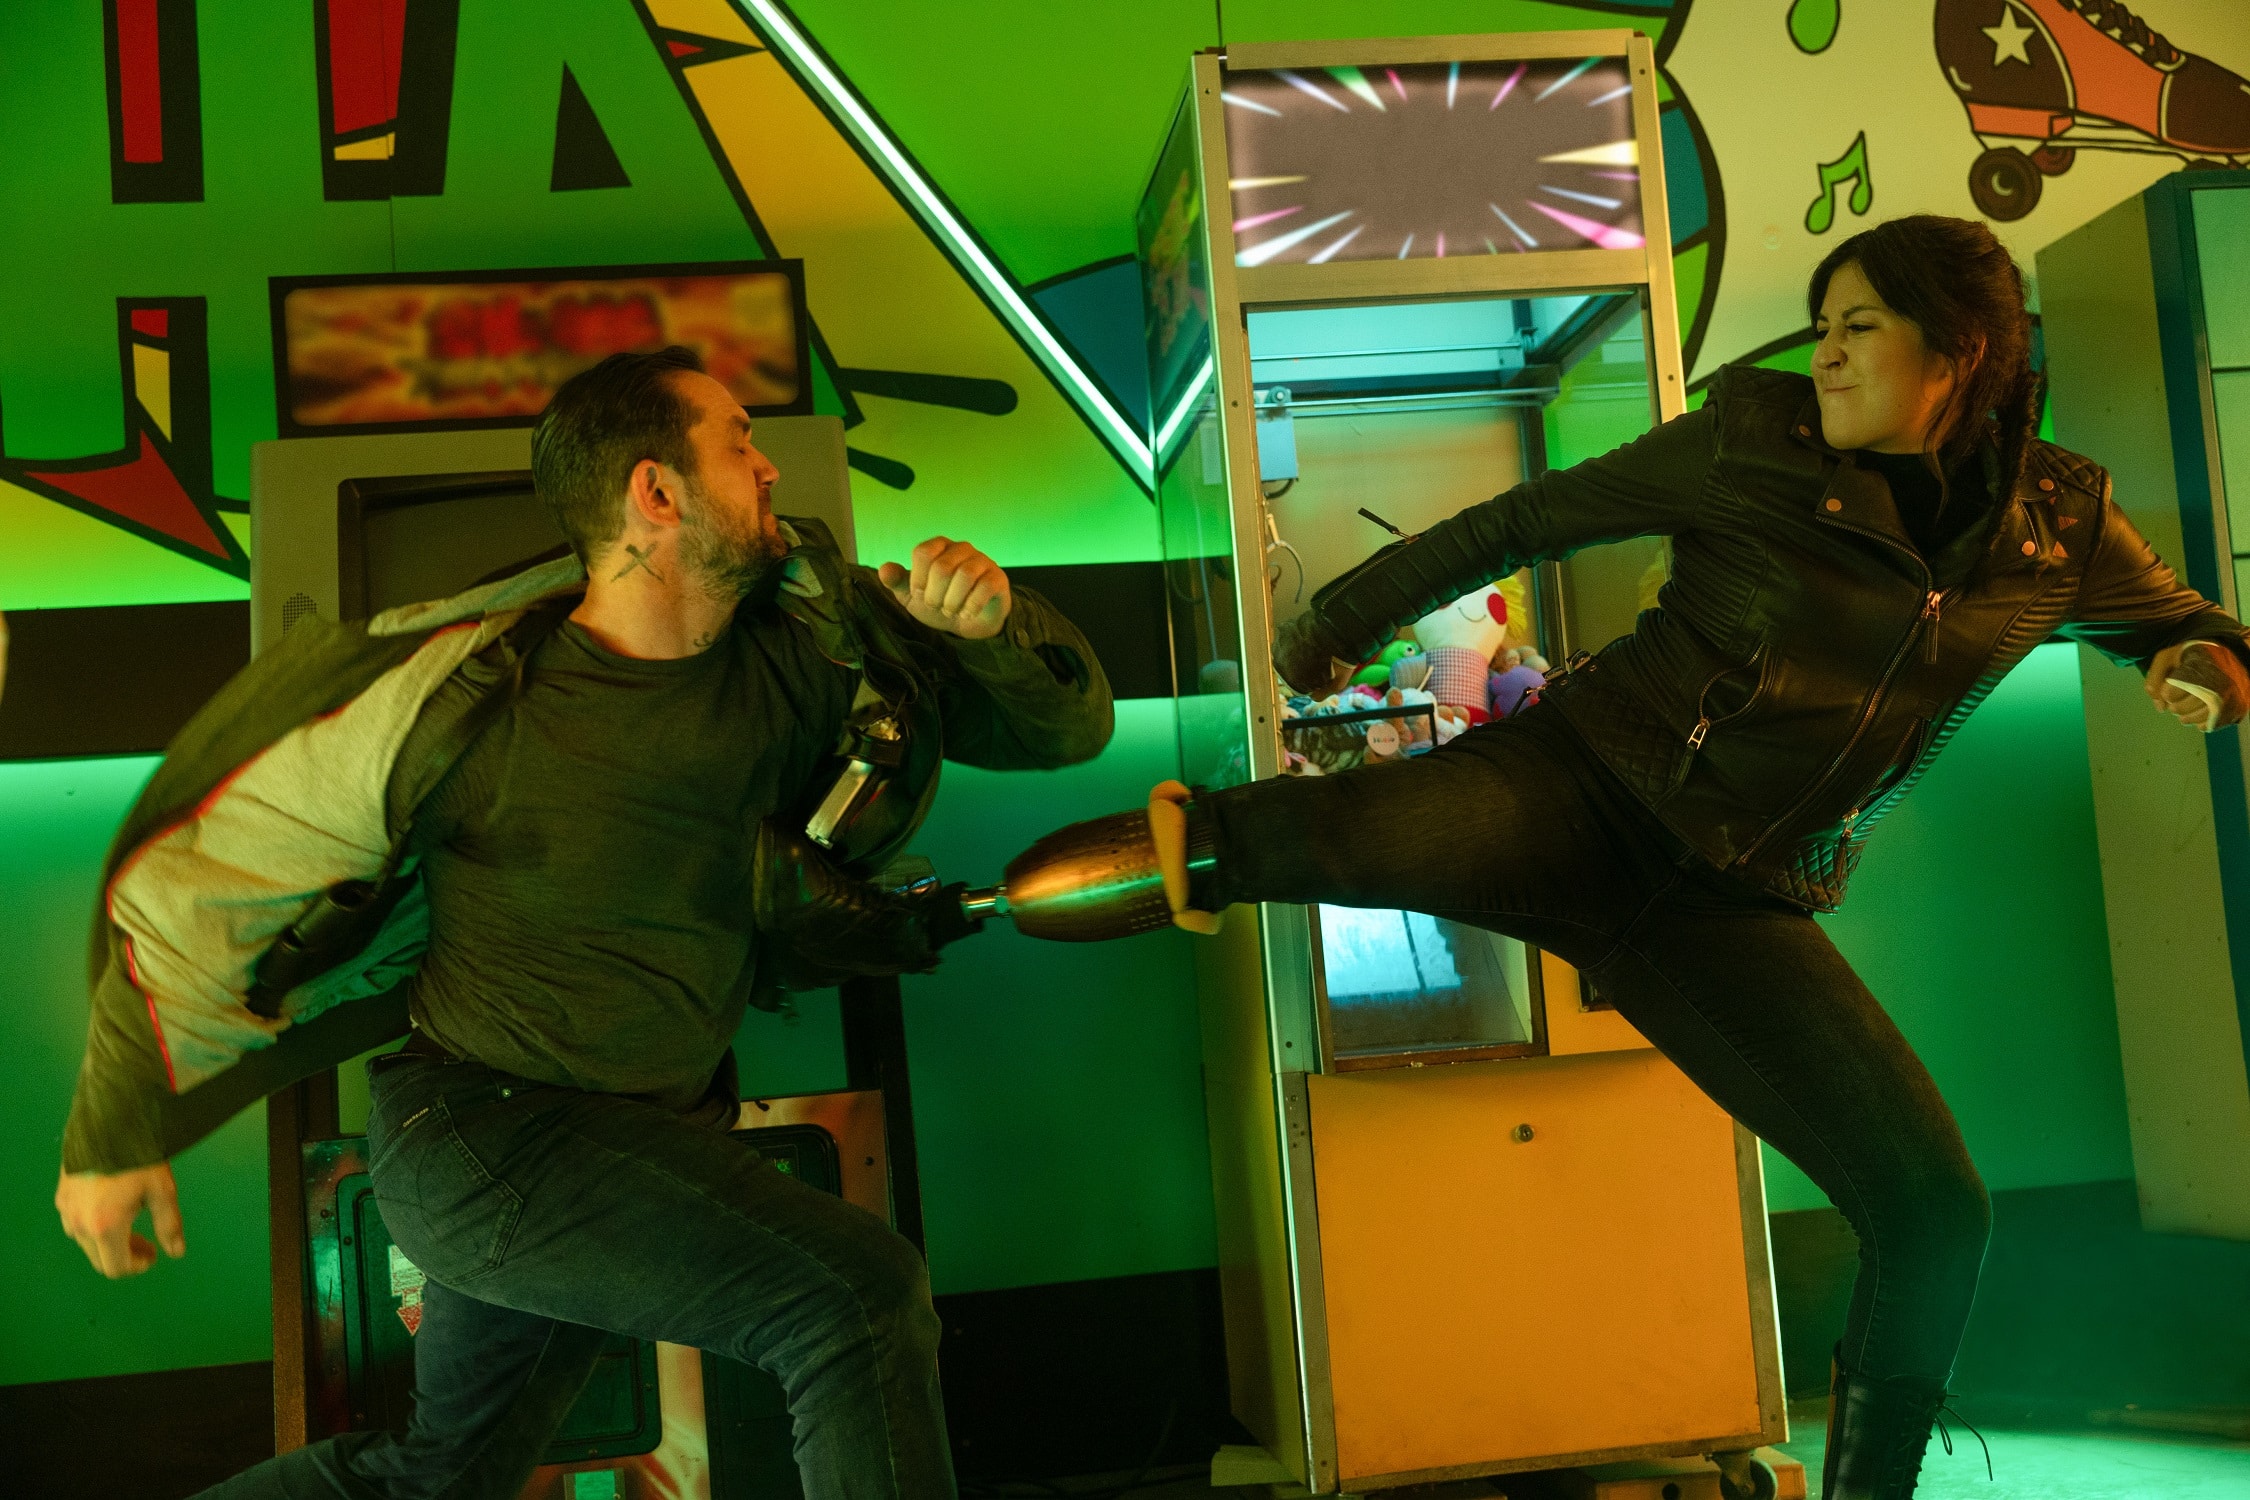 A Native American woman with tied-back long dark hair and a leg prothesis, wearing a black leather jacket and black jeans, kicks a white man with buzzed hair, green jacket, and blue jeans, with her prosthesis. The background is neon, 90's themed, and green-hued.